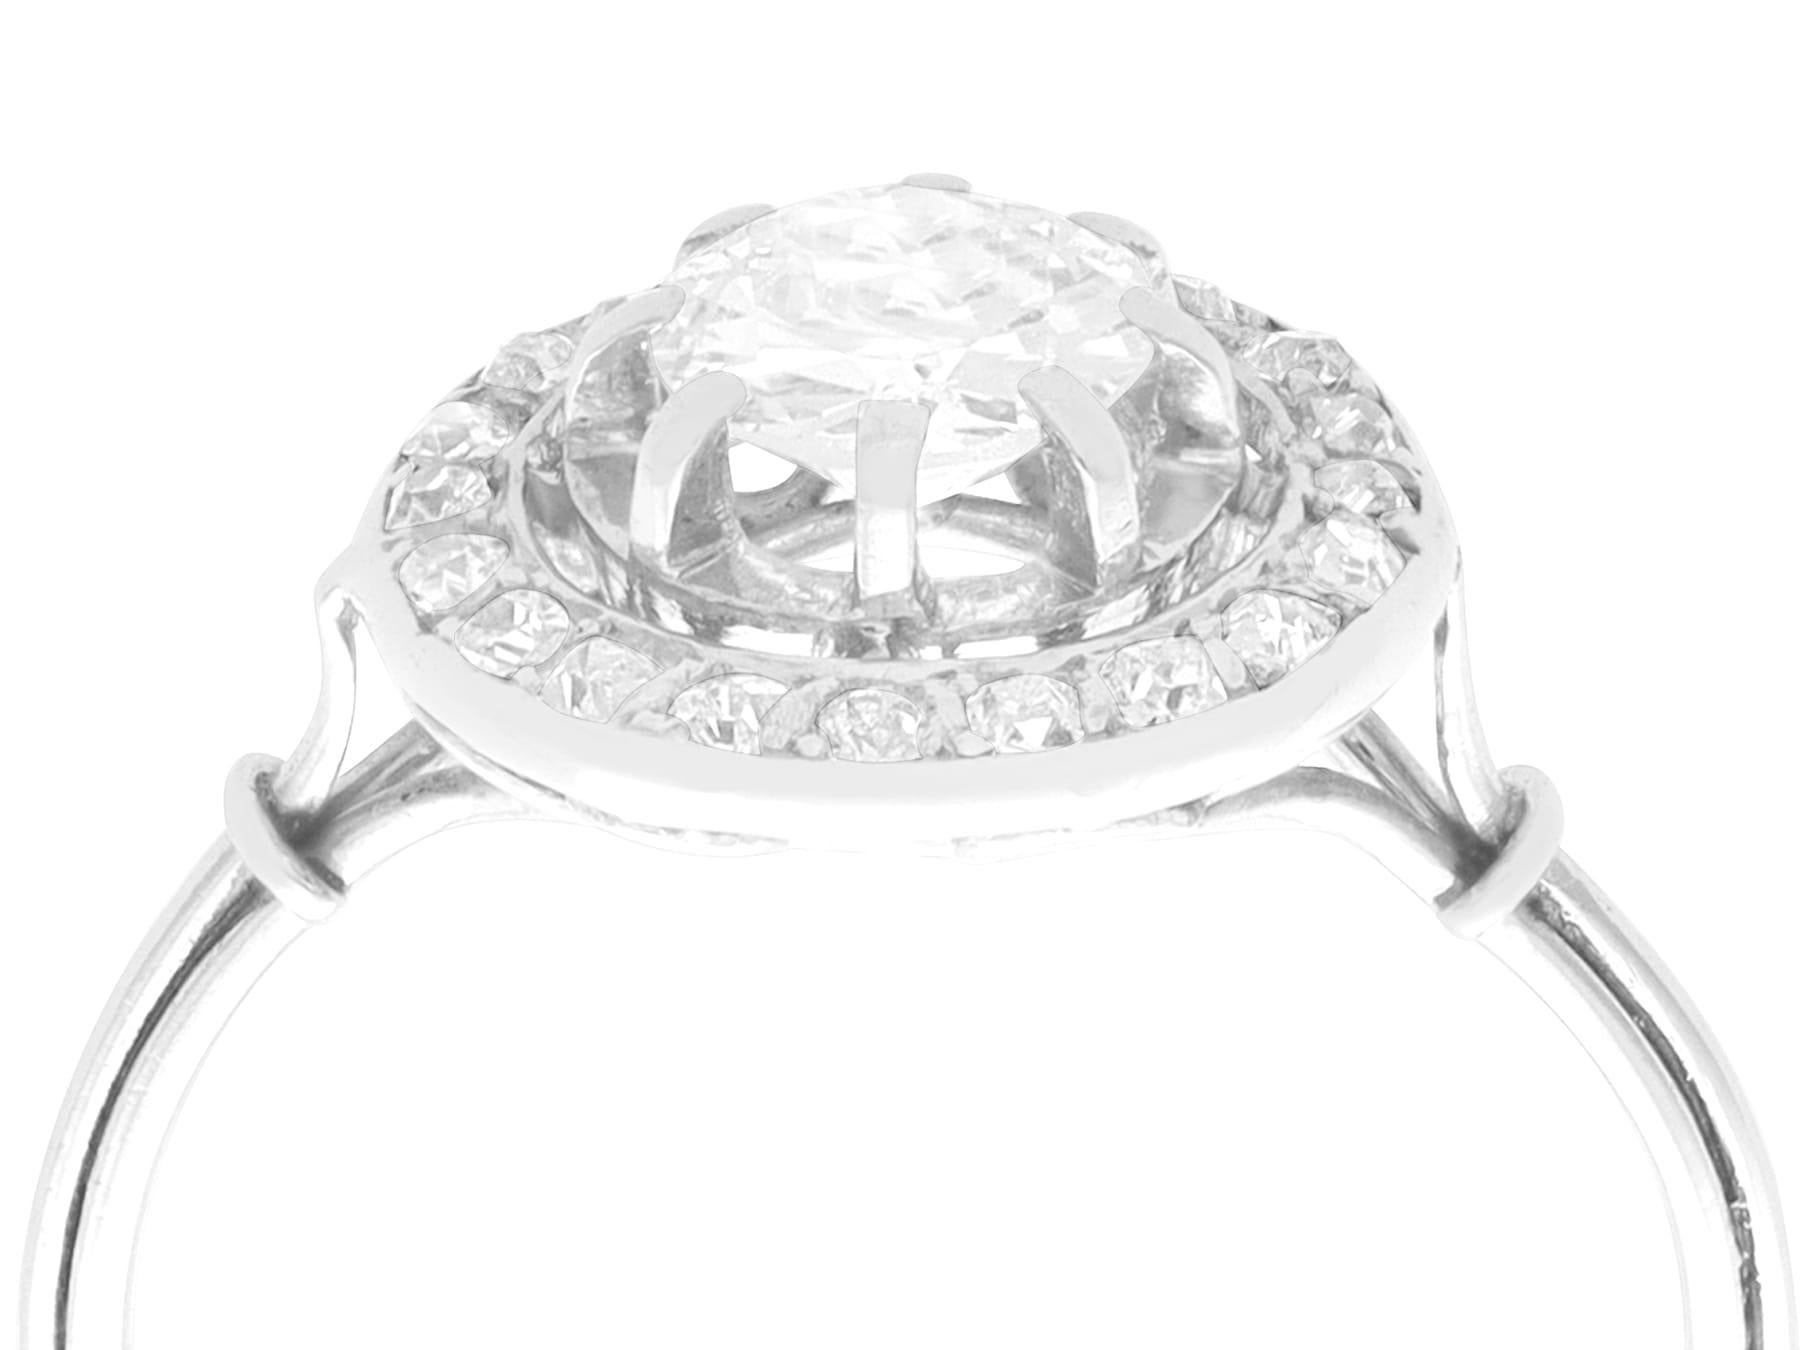 A fine and impressive antique Art Deco 0.72 carat diamond and platinum cluster ring; part of our diverse antique jewelry and estate jewelry collections.

This fine and impressive diamond Art Deco ring has been crafted in platinum.

The millegrain